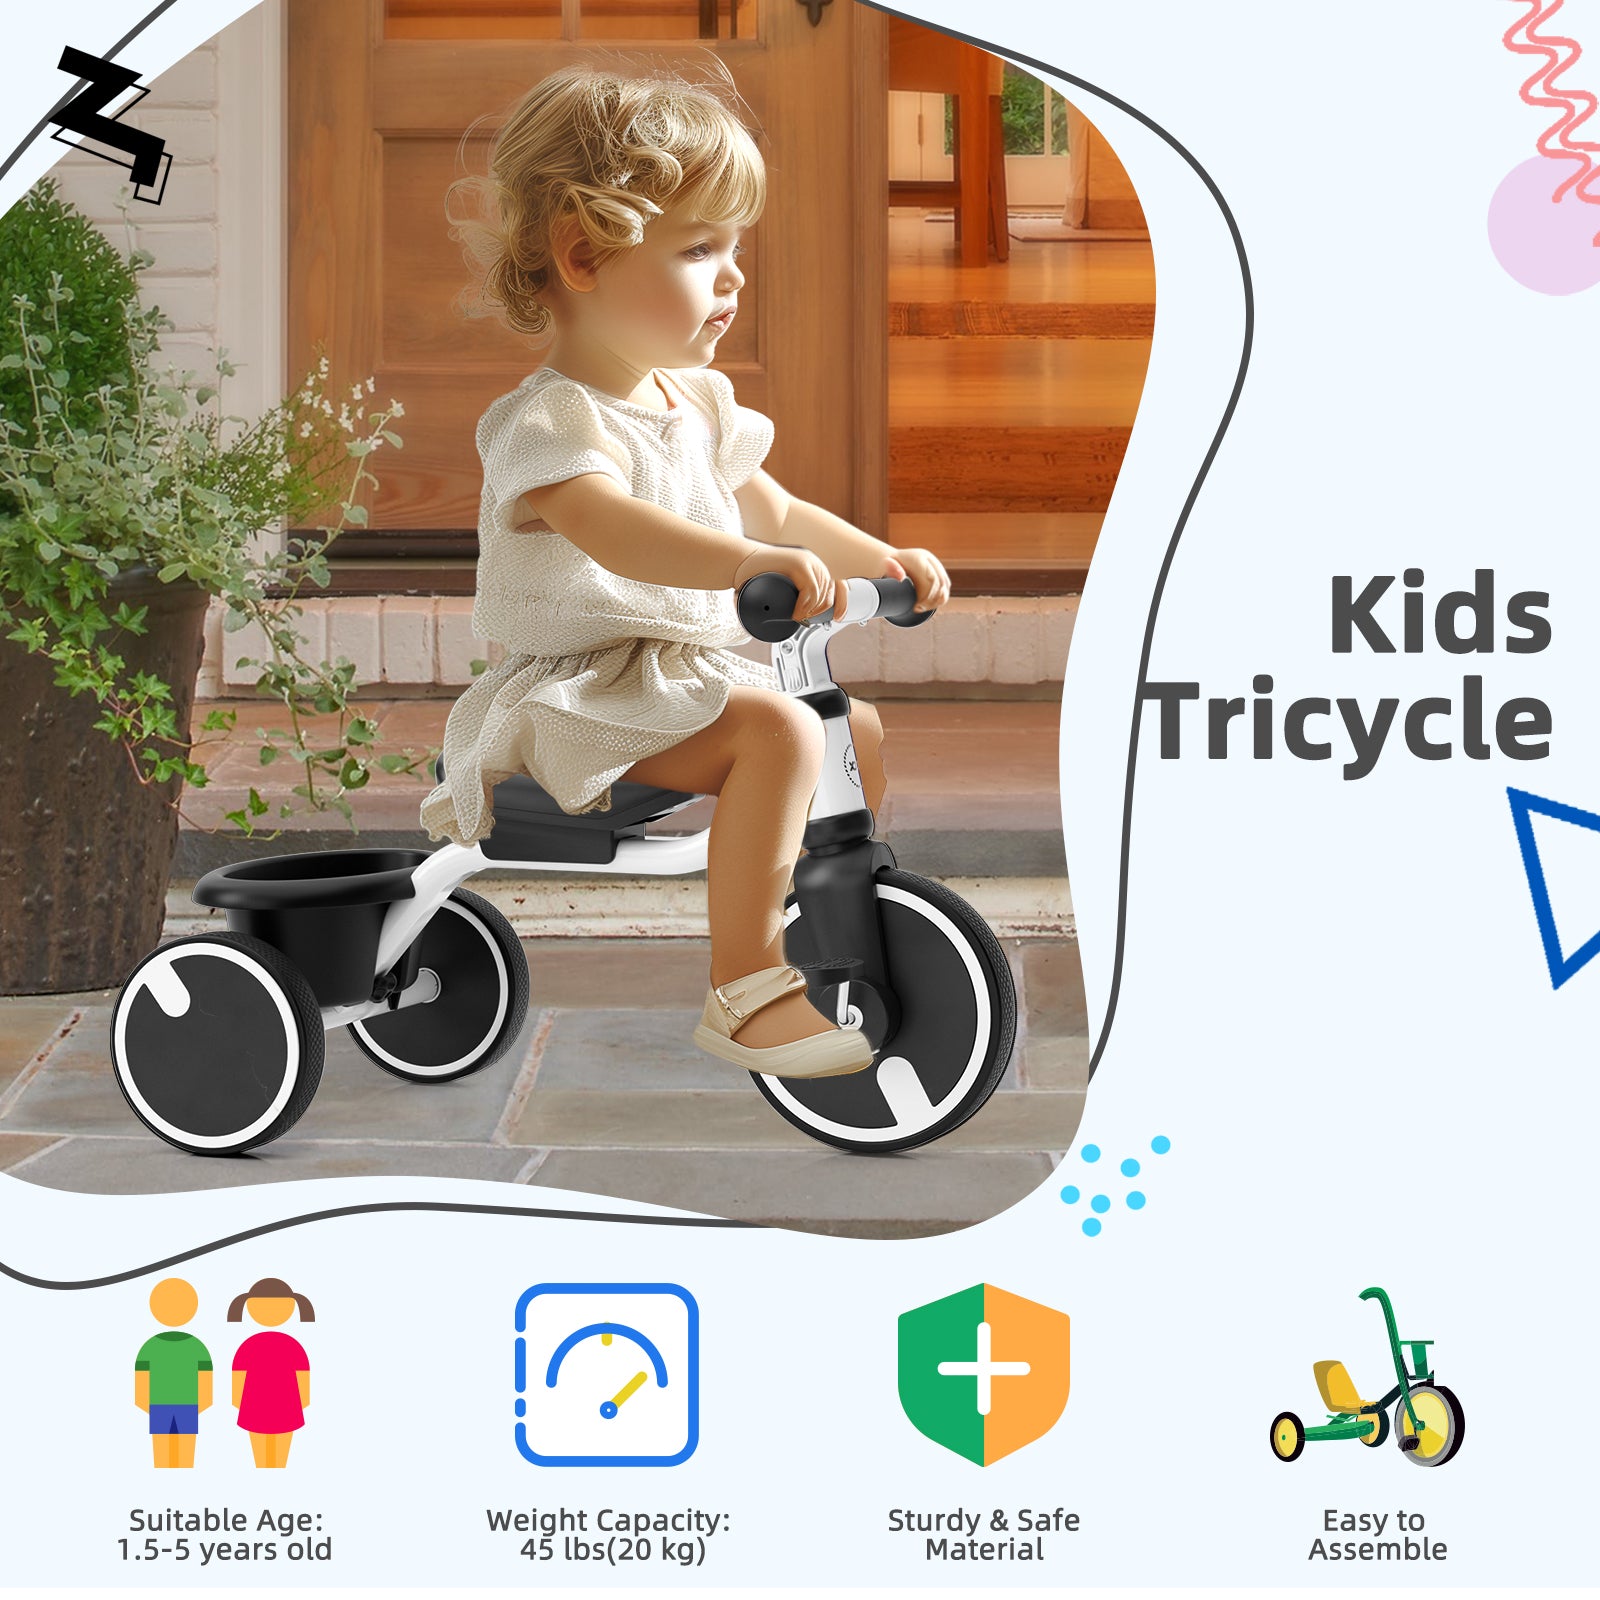 XJD Toddler Training  Balance Bike - No Pedal Bicycle for Kids Ages 1.5+, White